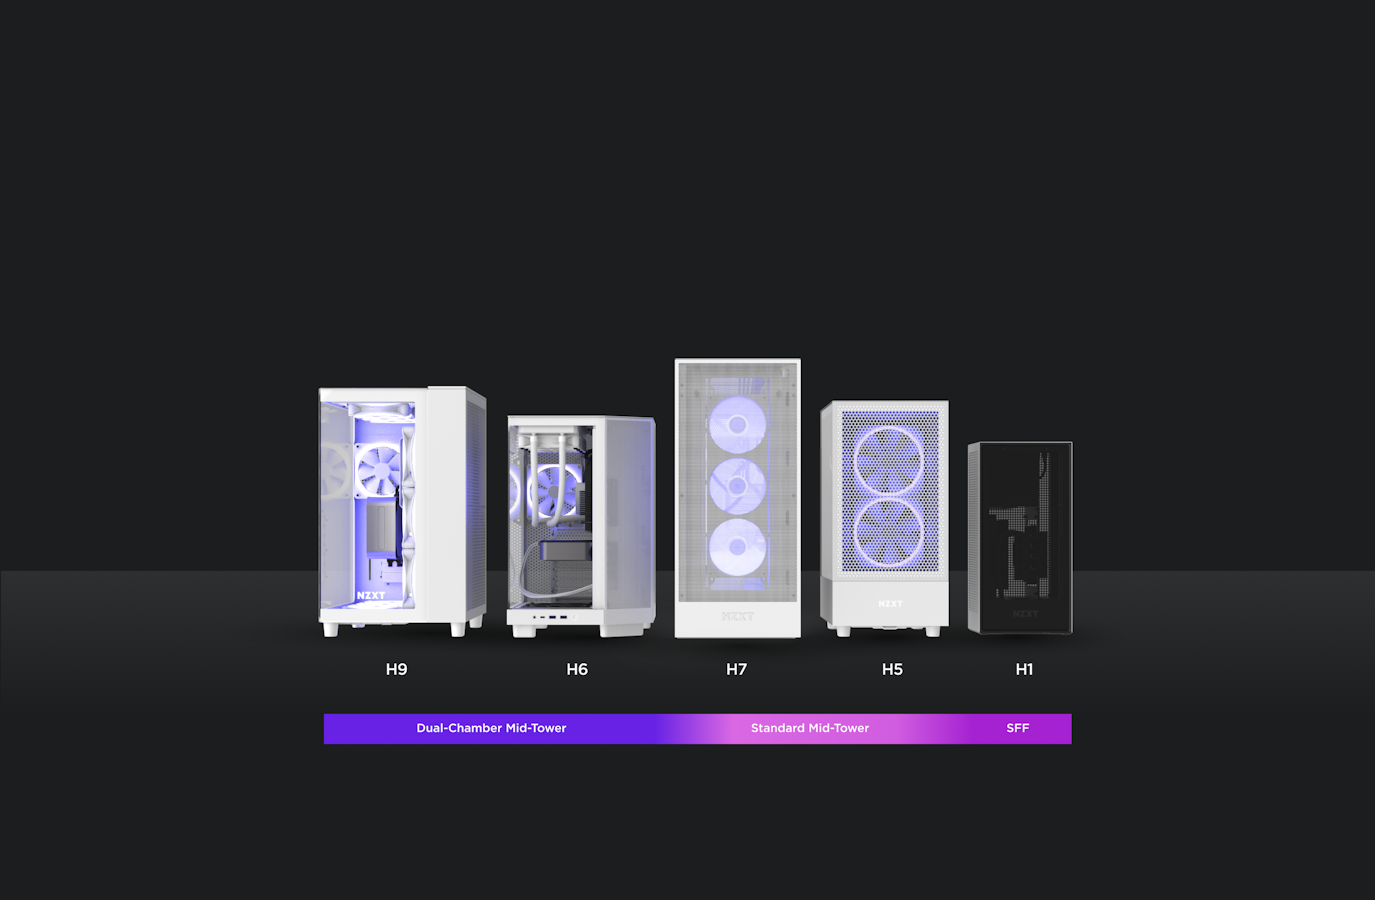 NZXT Cases - Side-by-side size comparison of H9, H6, H7, H5, and H1